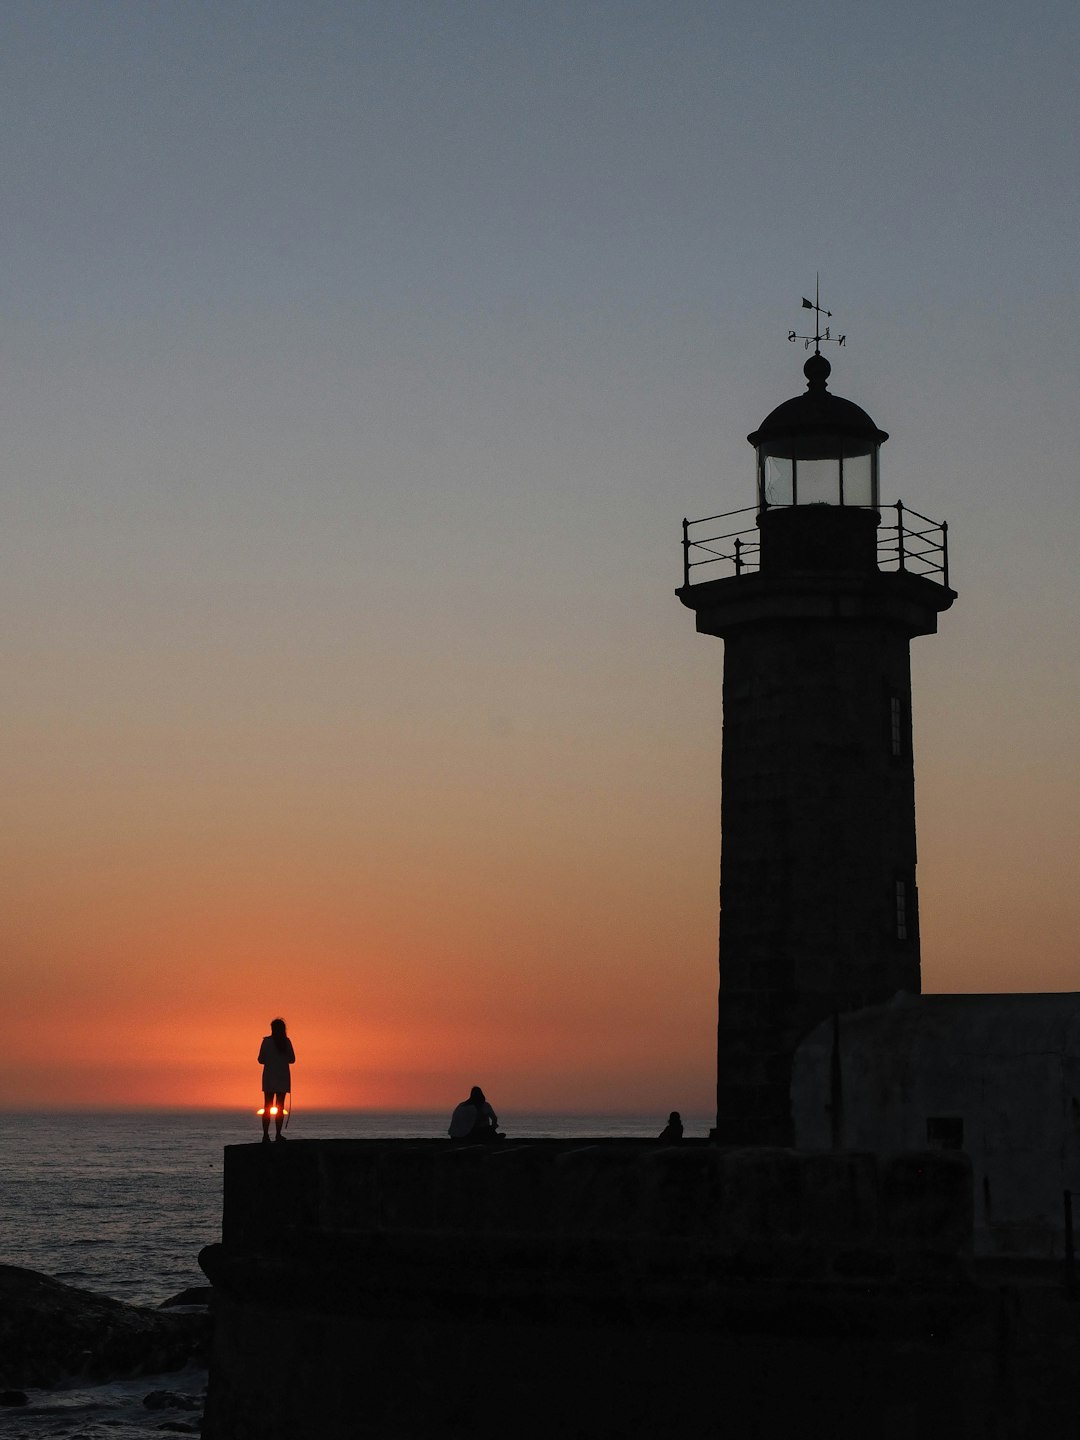 Travel Tips and Stories of Felgueiras Lighthouse in Portugal